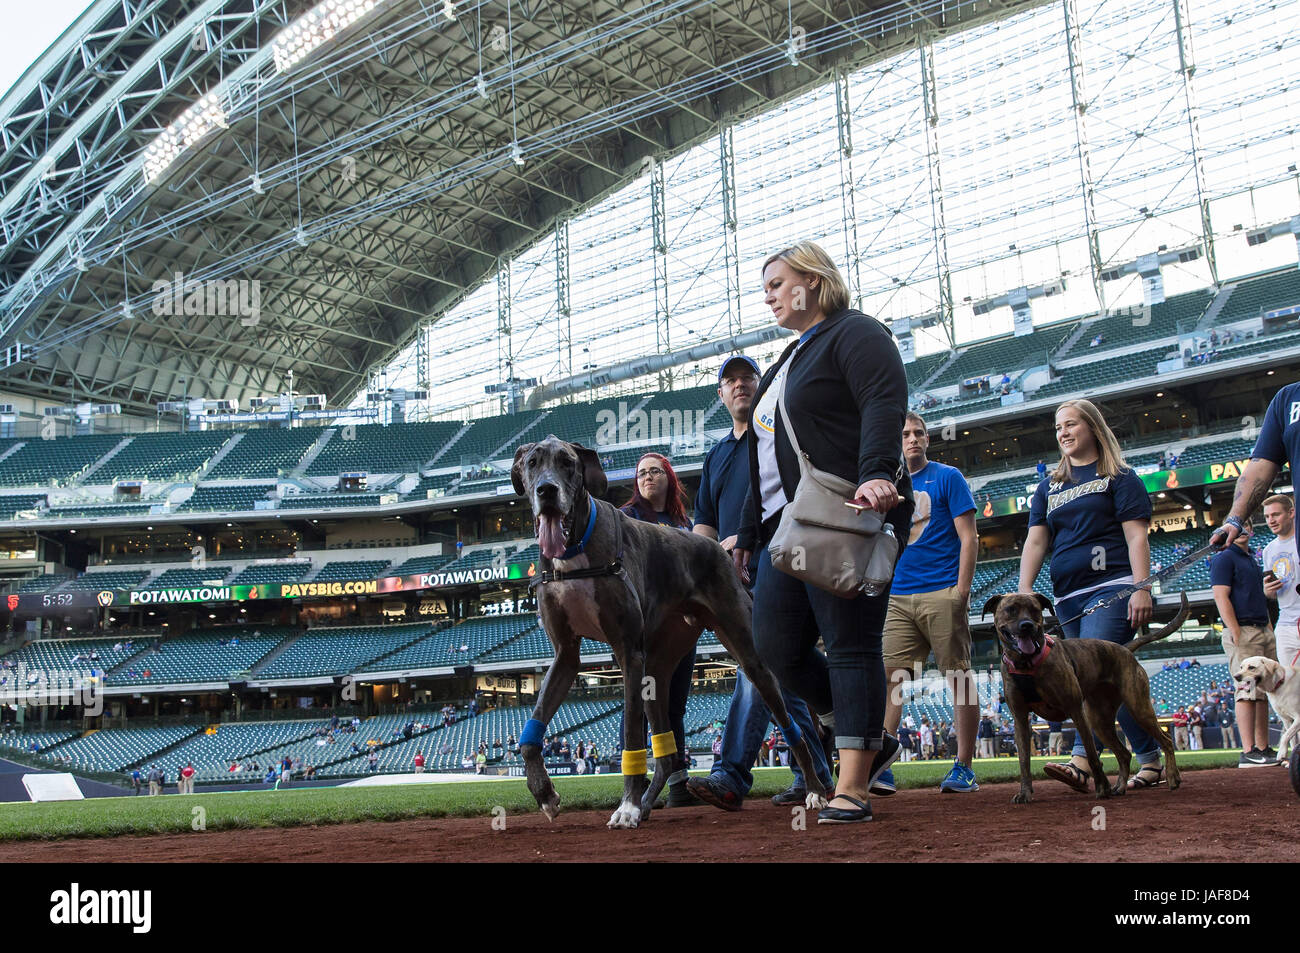 Milwaukee, WI, USA. 6th June, 2017. Bring your dog to the ballpark day at Miller Park. Fans had the opportunity to walk their dogs around the field before the Major League Baseball game between the Milwaukee Brewers and the San Francisco Giants at Miller Park in Milwaukee, WI. John Fisher/CSM/Alamy Live News Stock Photo